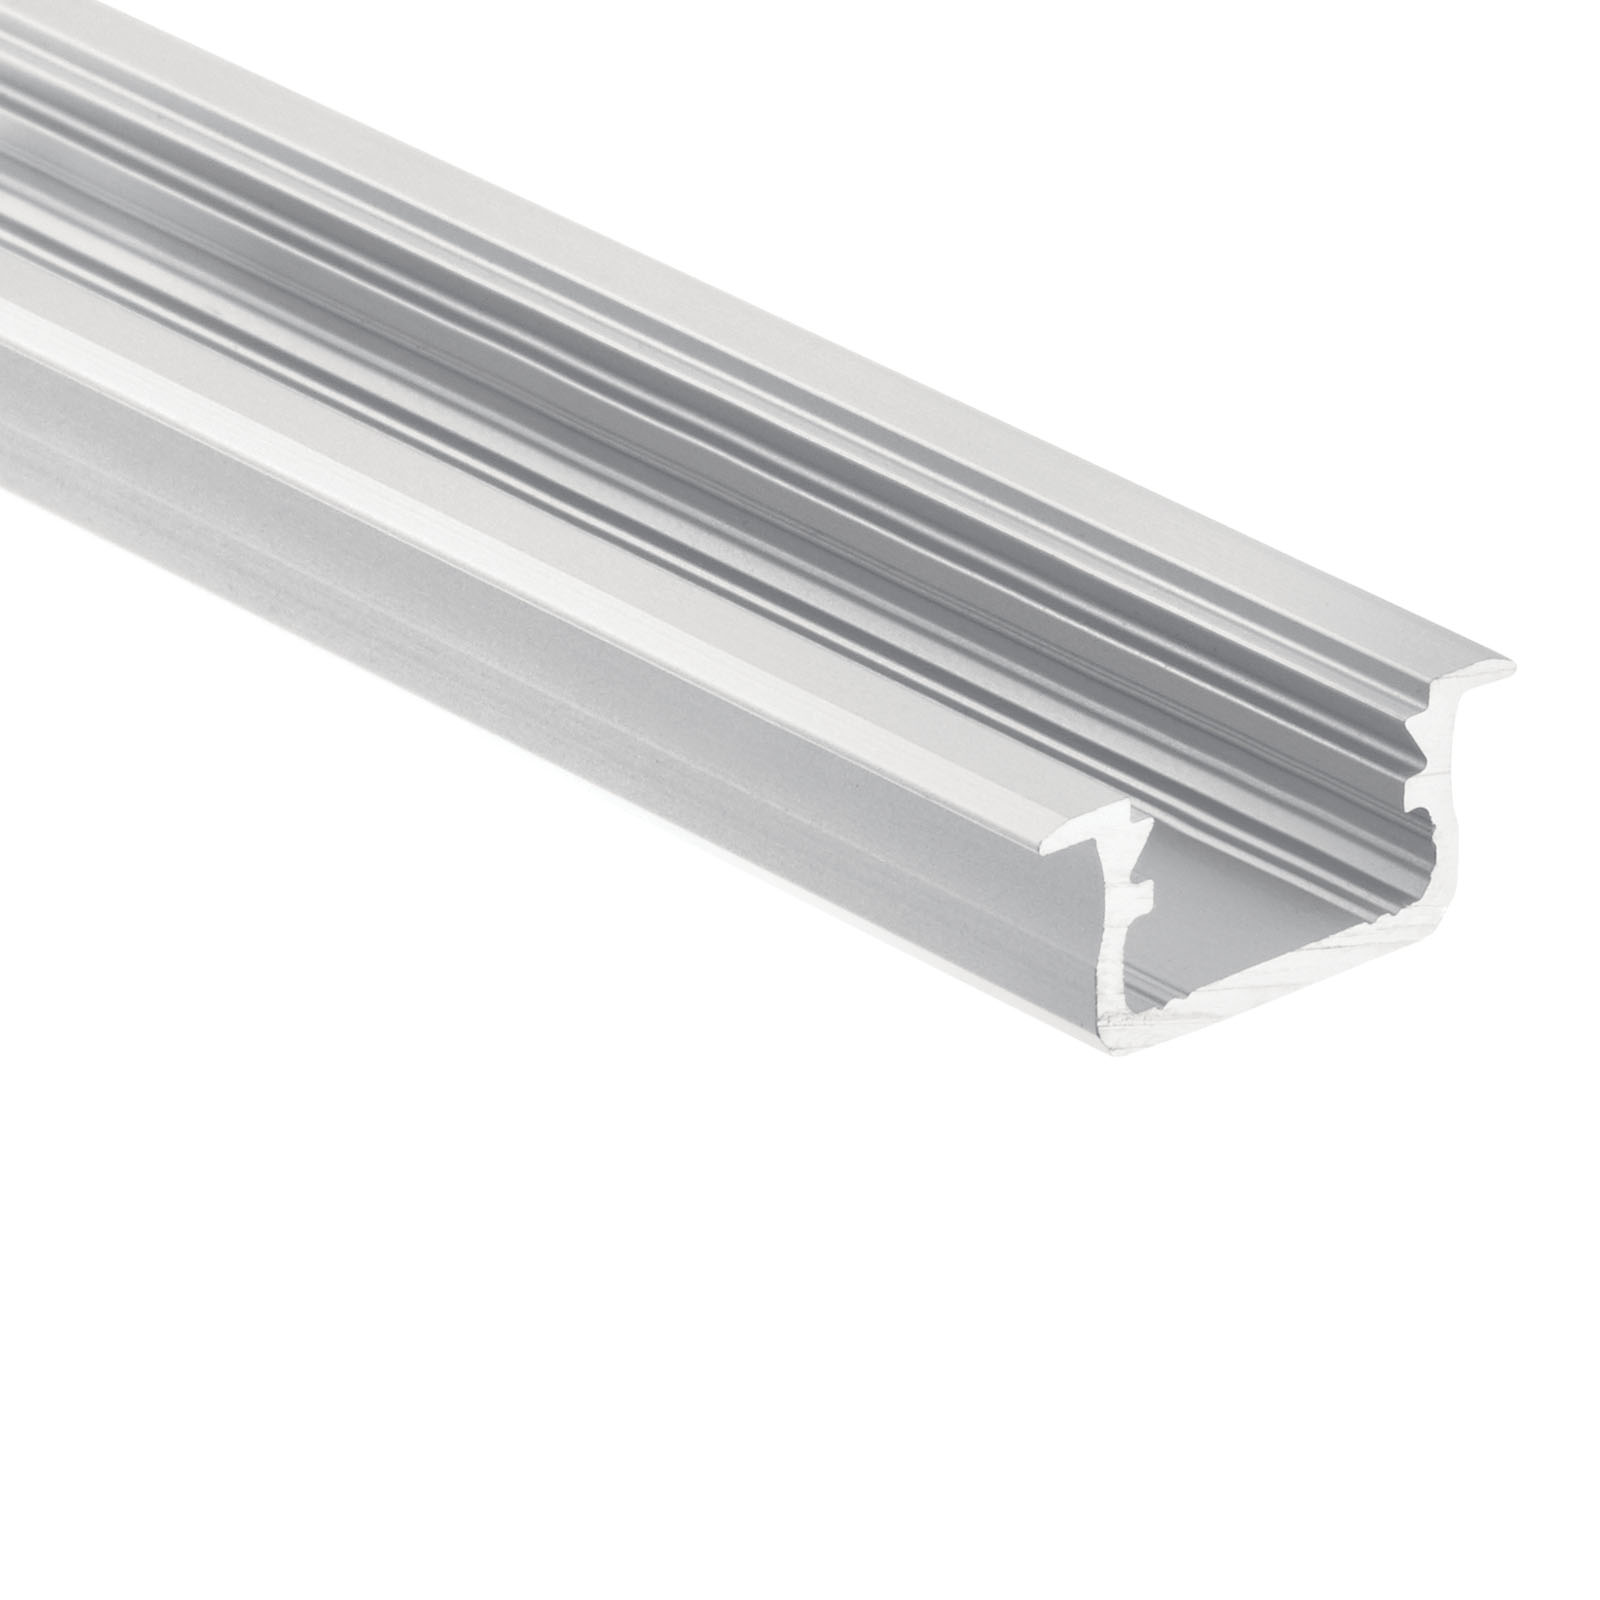 Recess tape light into shelves, cabinets or wall installations with the TE Standard  Series aluminum extruded channel. Its standard depth offers a light distribution that is gently diffused. To complete the channel system, add a coordinating lens and end caps, along with the Kichler LED Tape, power supply and accessories of choice.